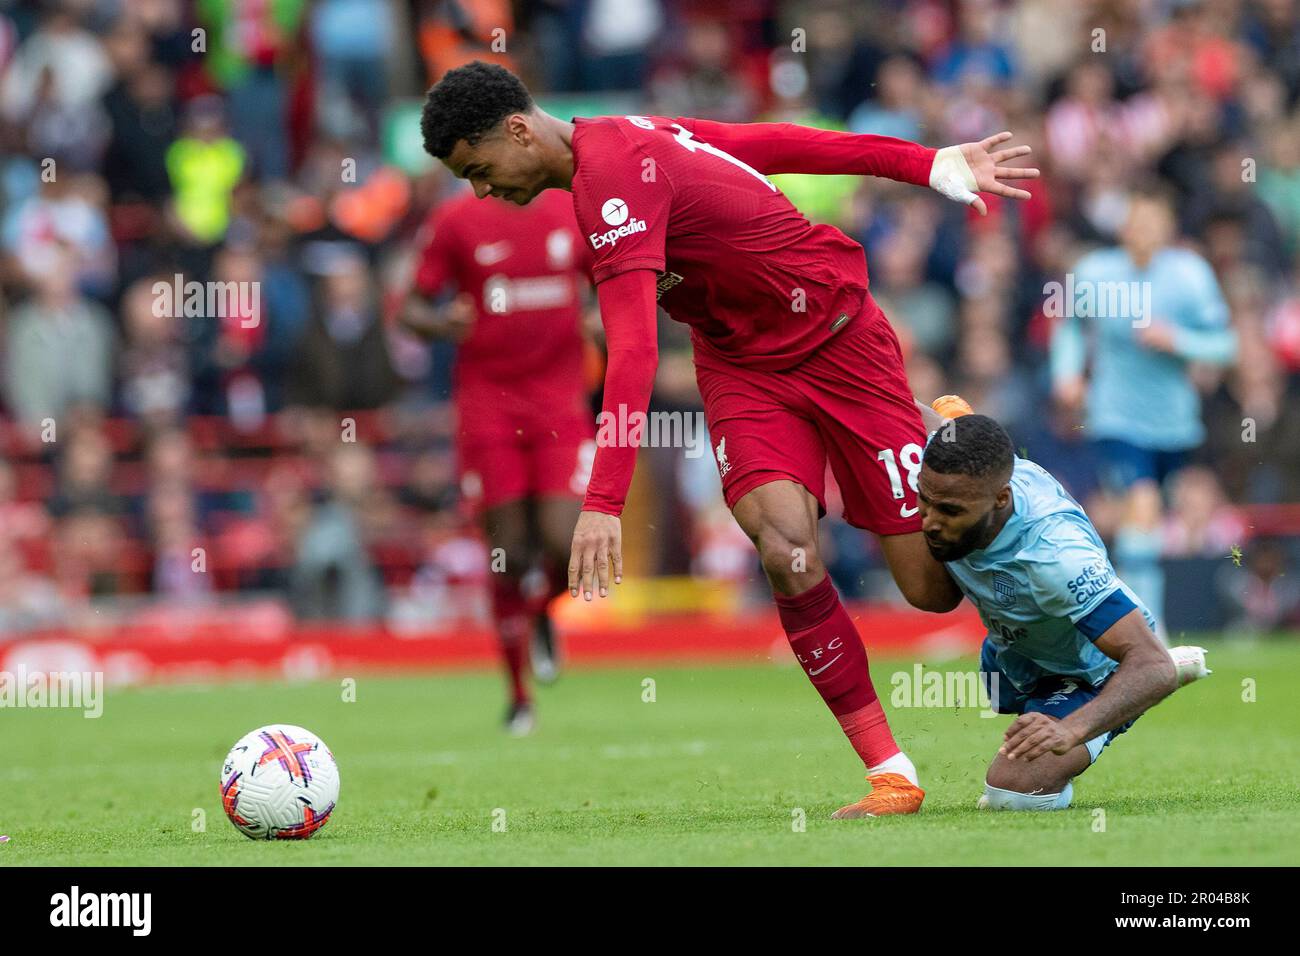 Cody Gakpo #18 of Liverpool in action during the Premier League match between Liverpool and Brentford at Anfield, Liverpool on Saturday 6th May 2023. (Photo: Mike Morese | MI News) Credit: MI News & Sport /Alamy Live News Stock Photo